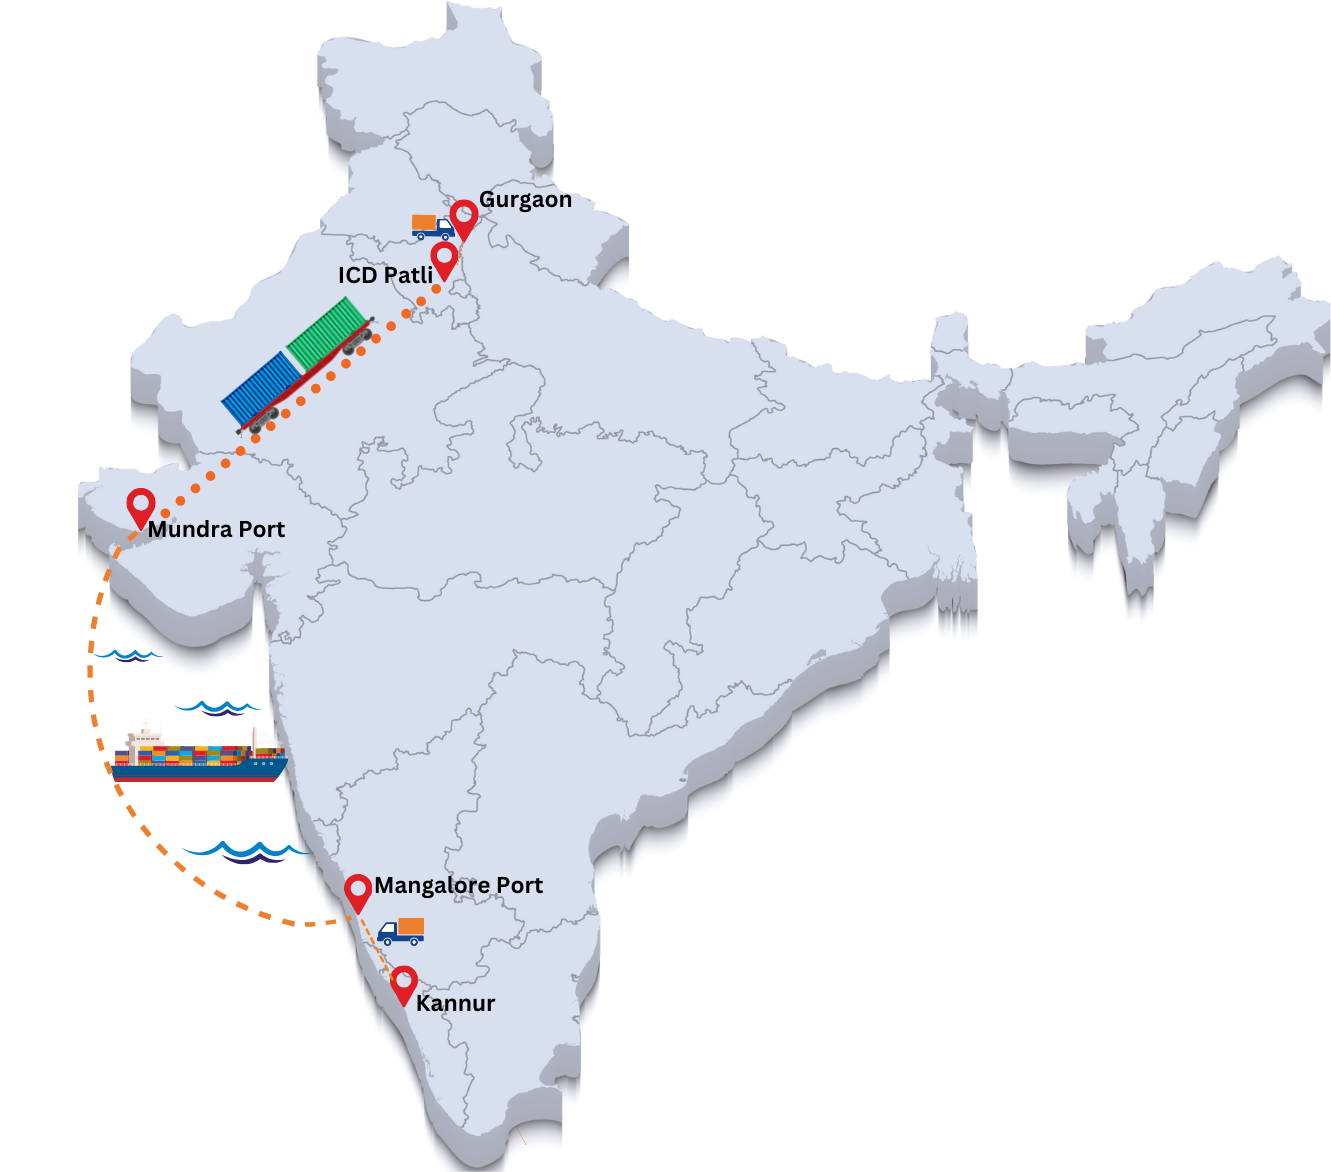 BLR Client Case Study For Trading Door To Door Coastal and Road Logistics Services In India